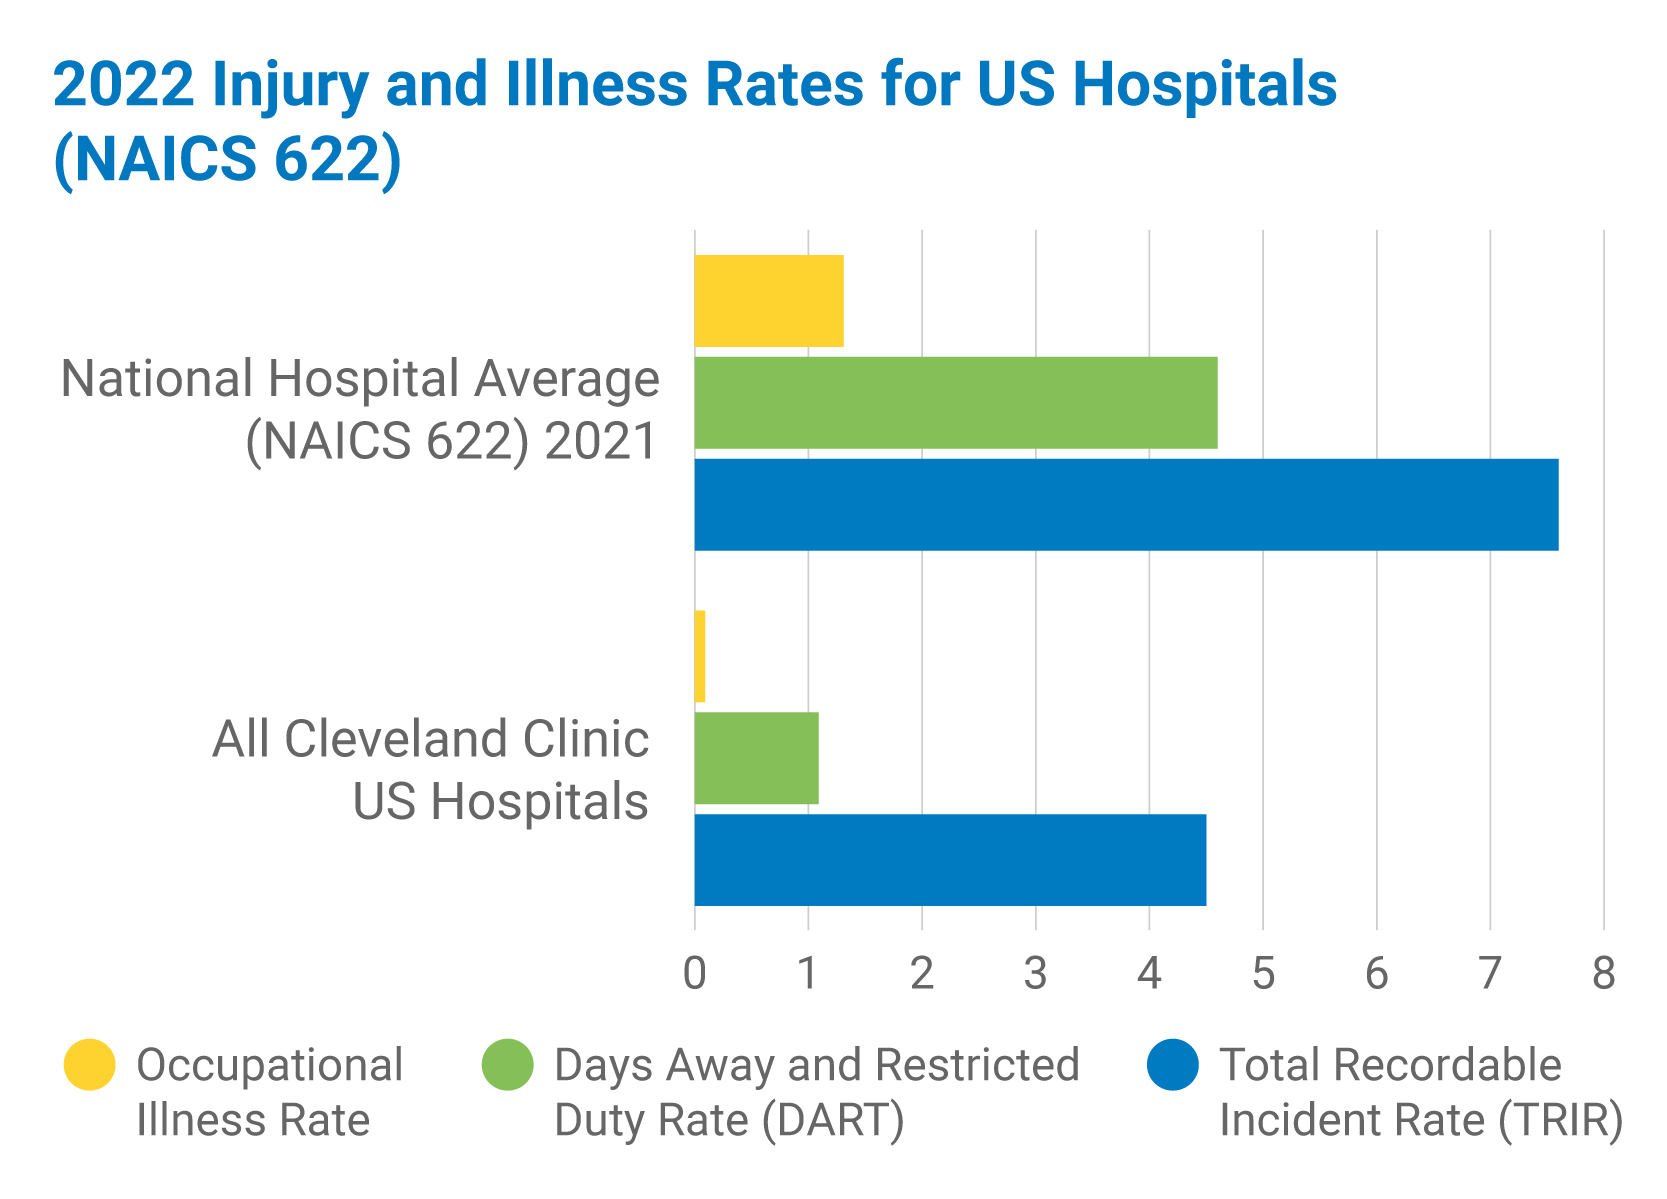 2022 injury and illness rates for US hospitals